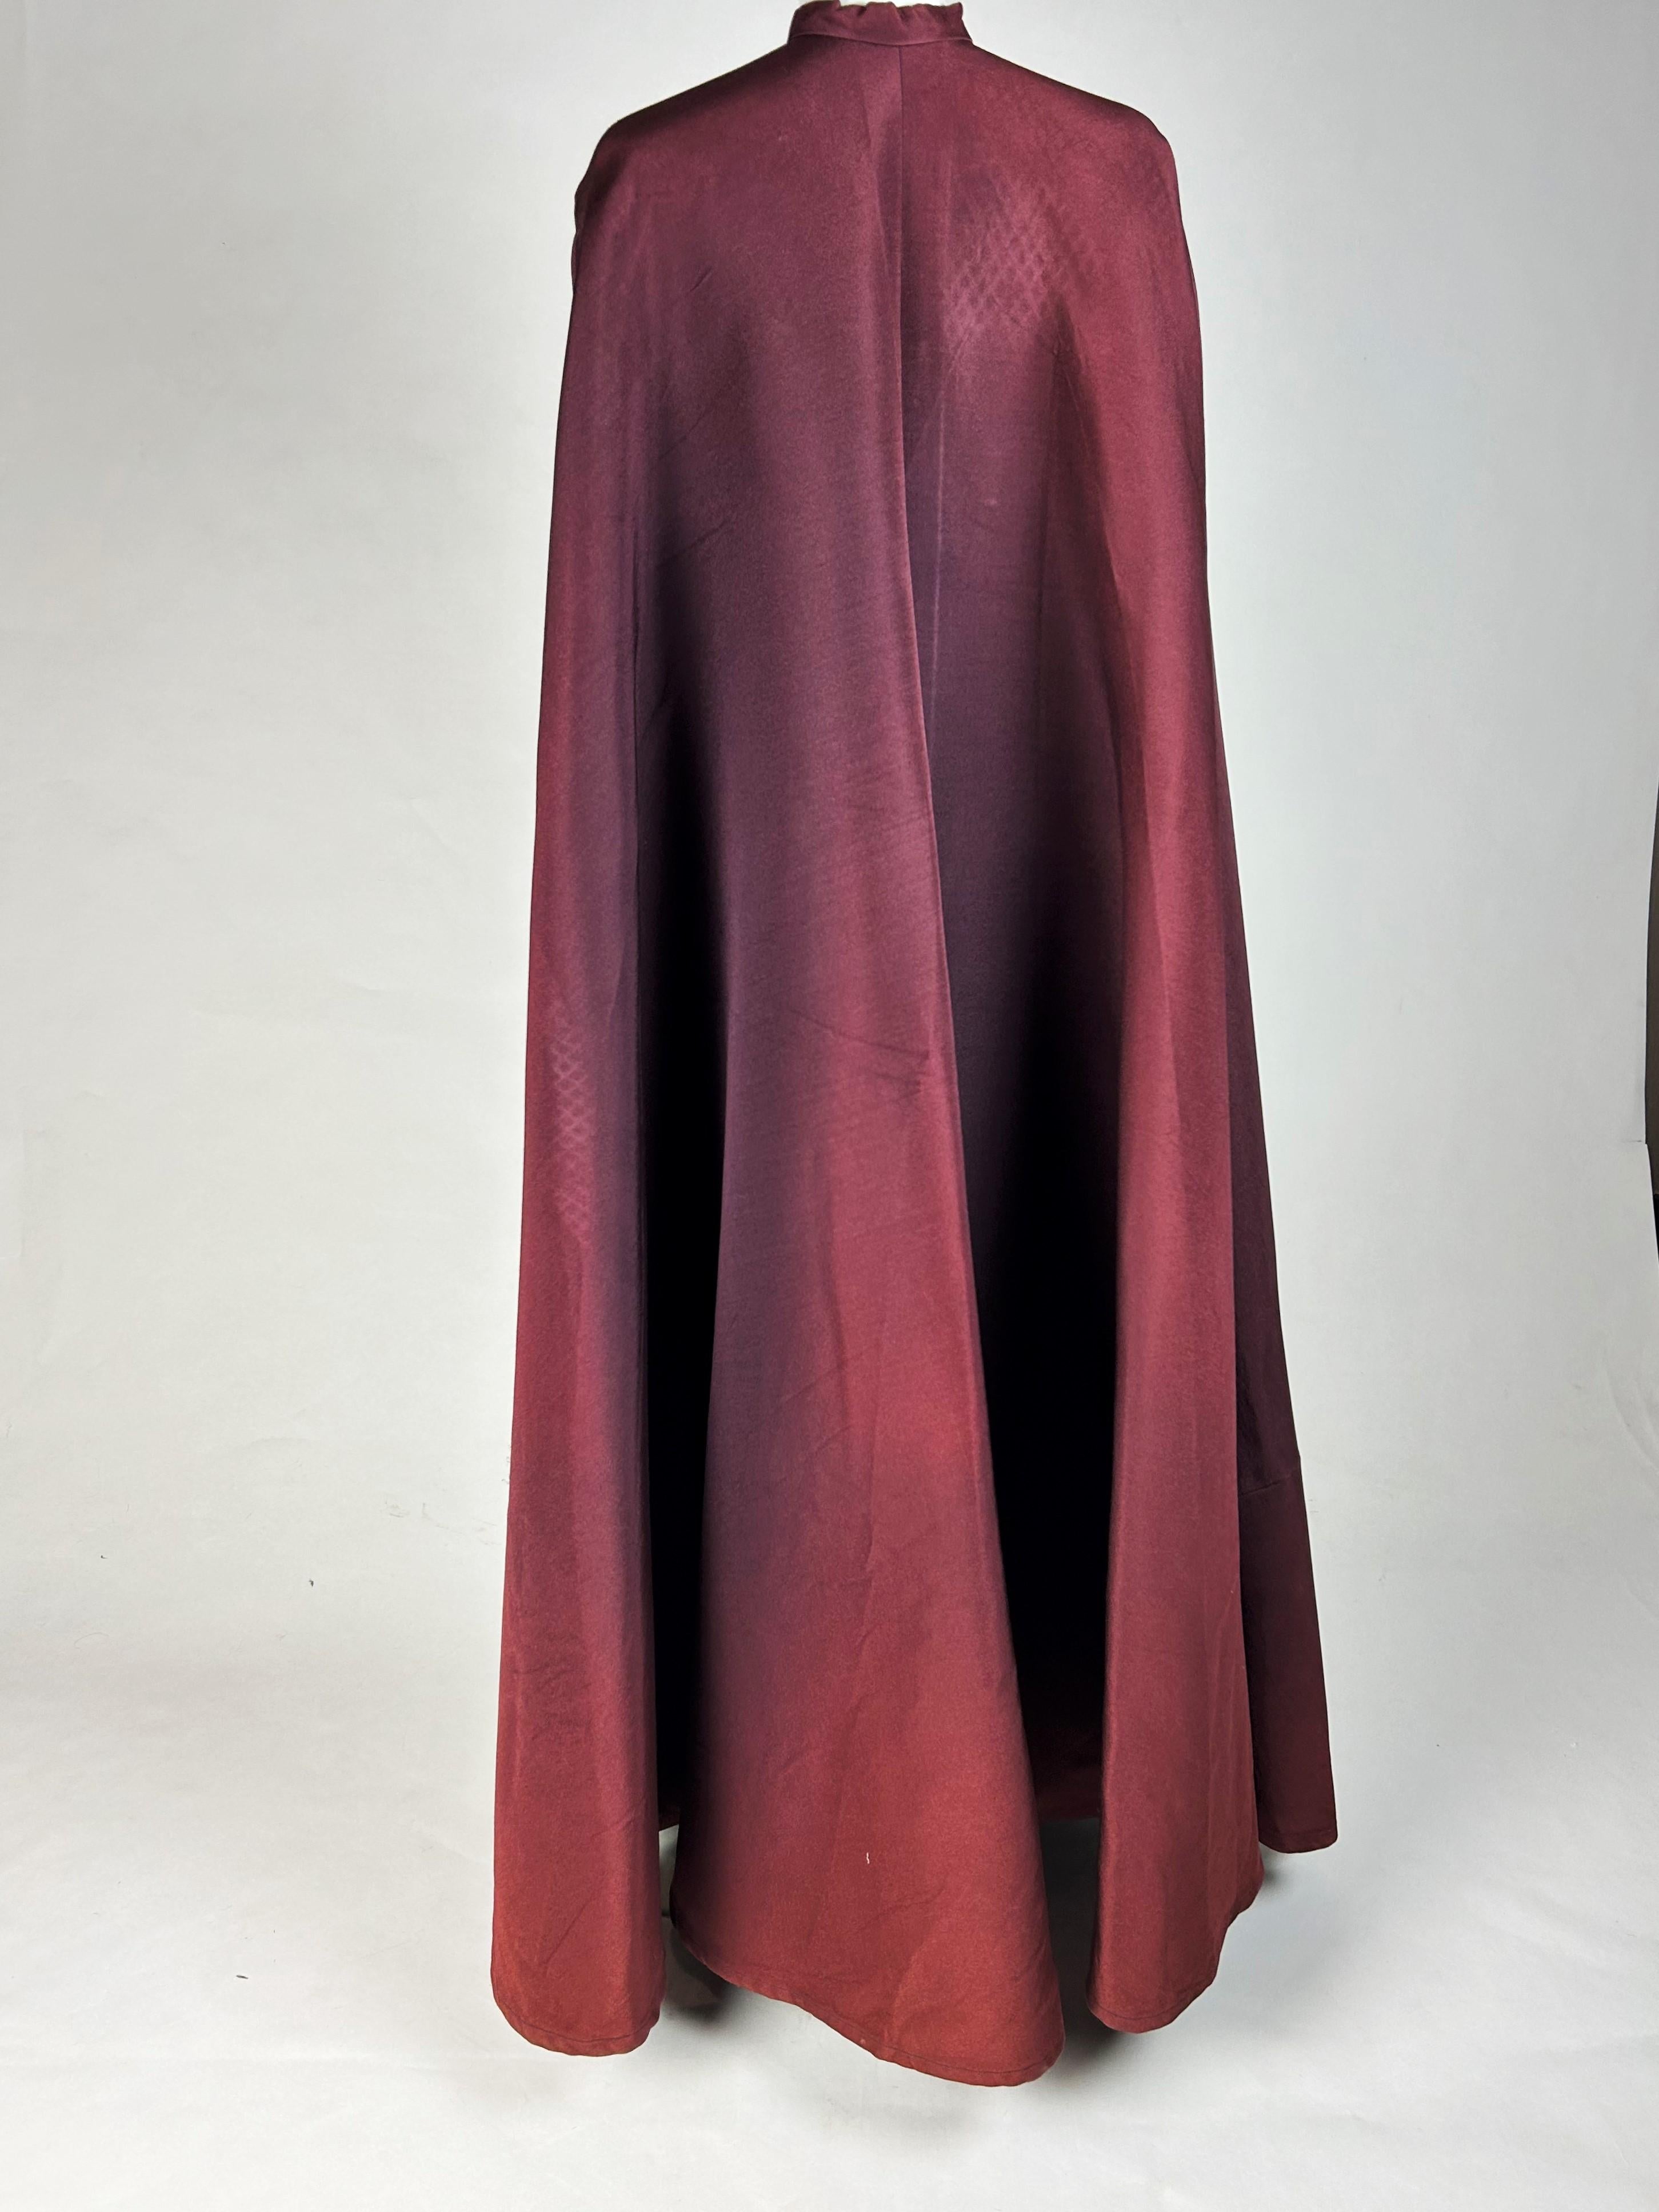 Haute Couture fashion show cape by Madame Grès numbered 11633 Circa 1980 For Sale 3